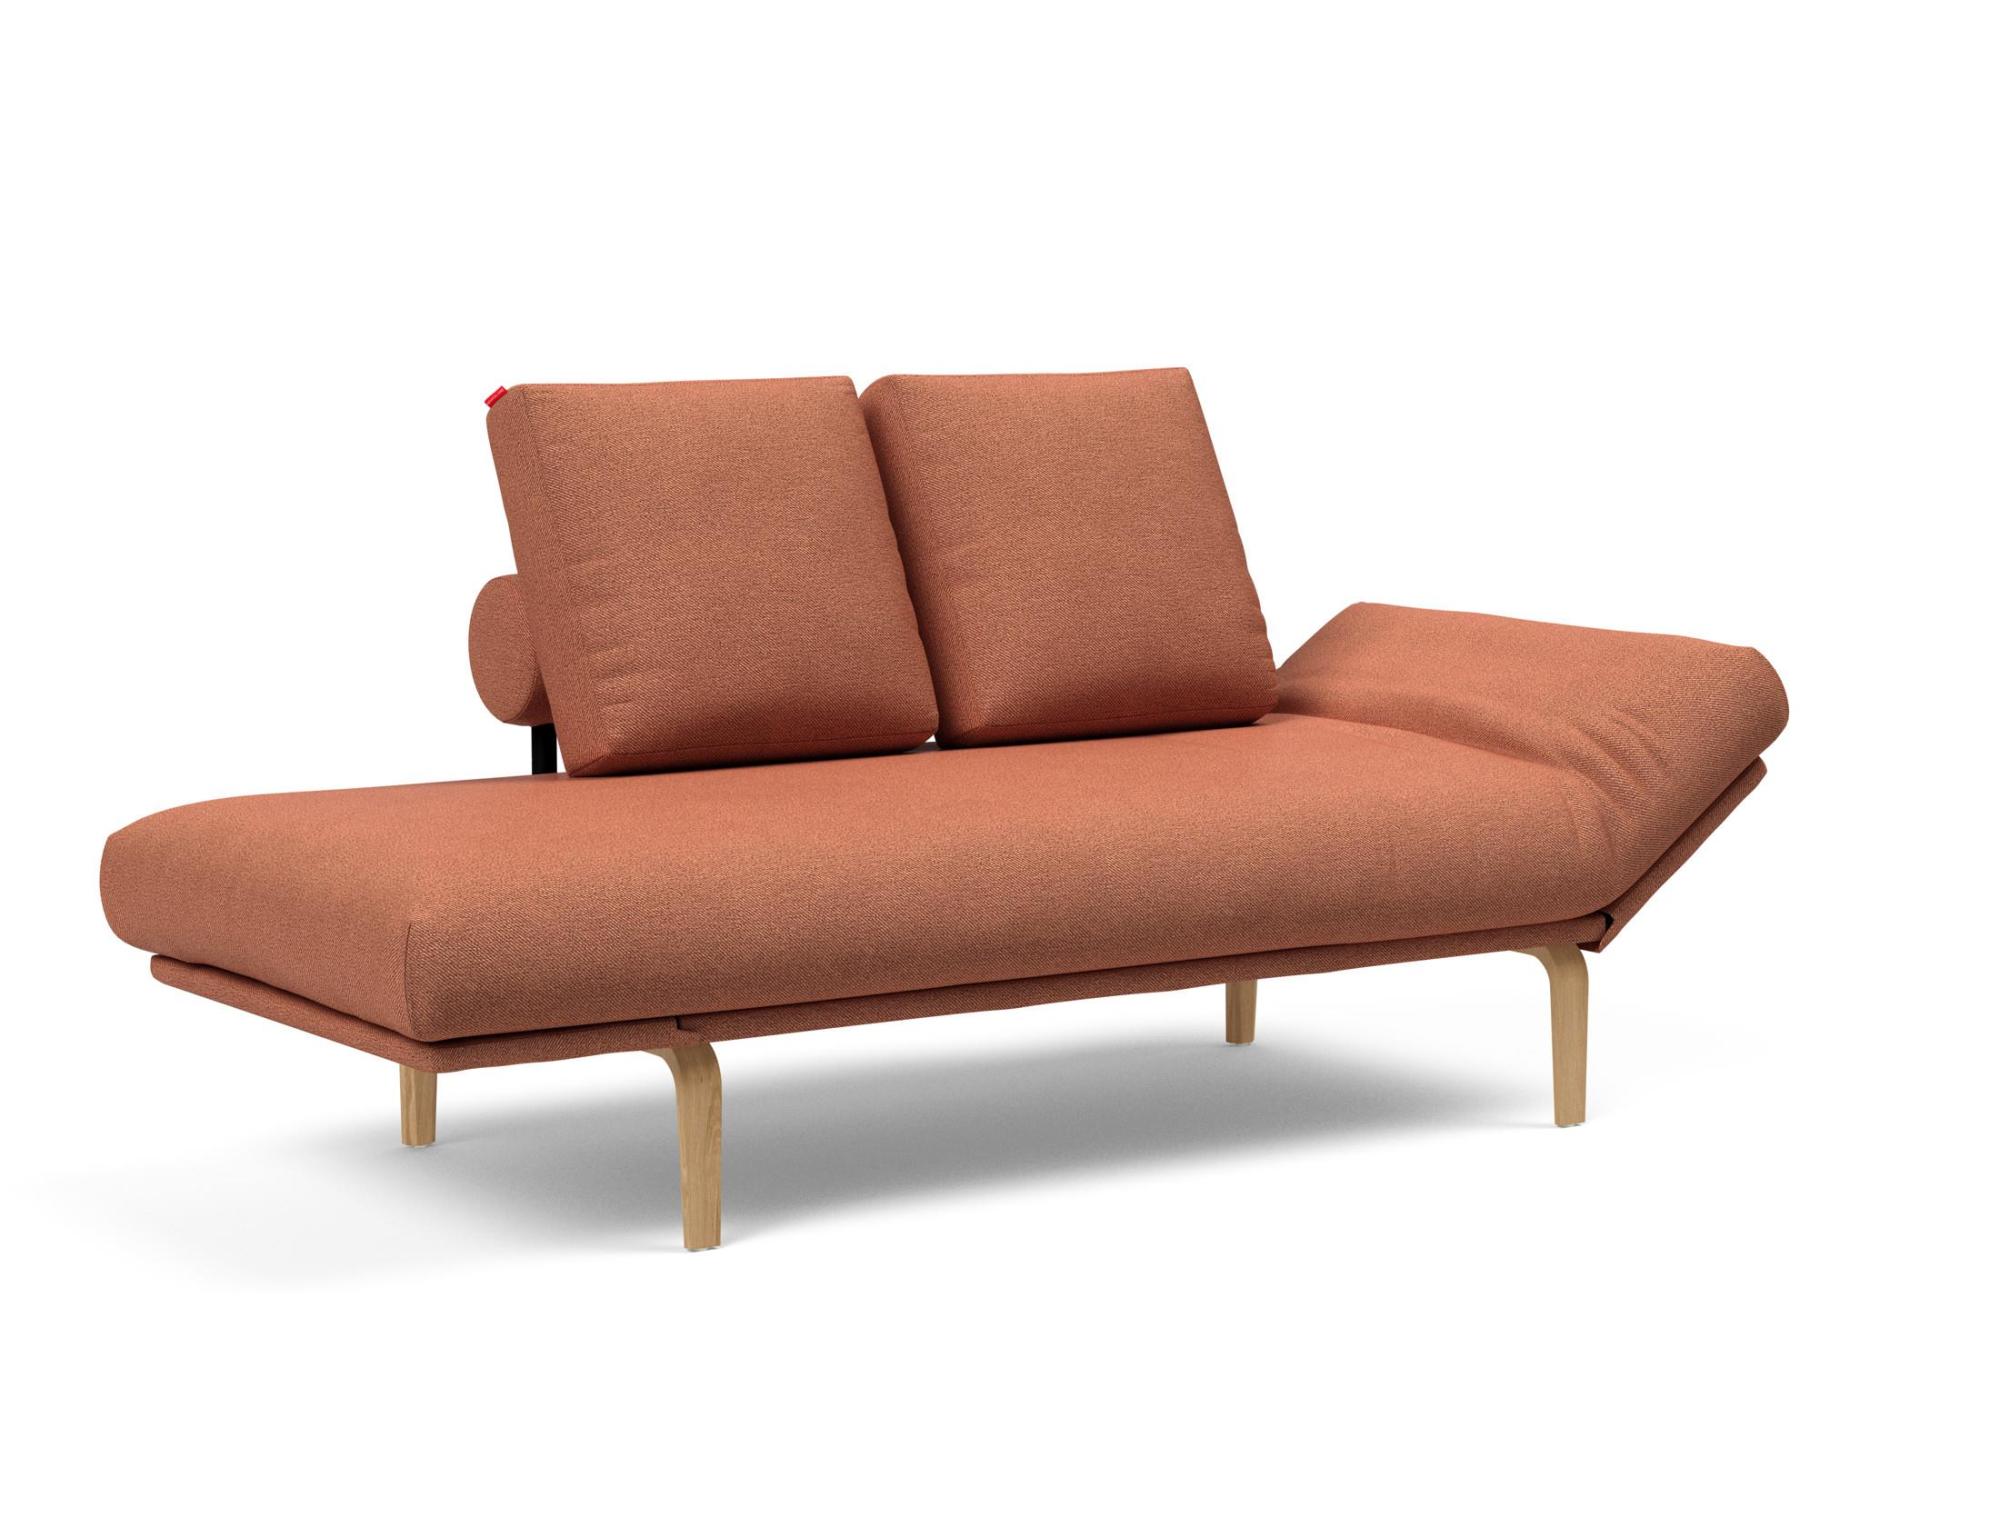 Liege/Daybed Liege/Daybed Rollo Innovation Sofas 